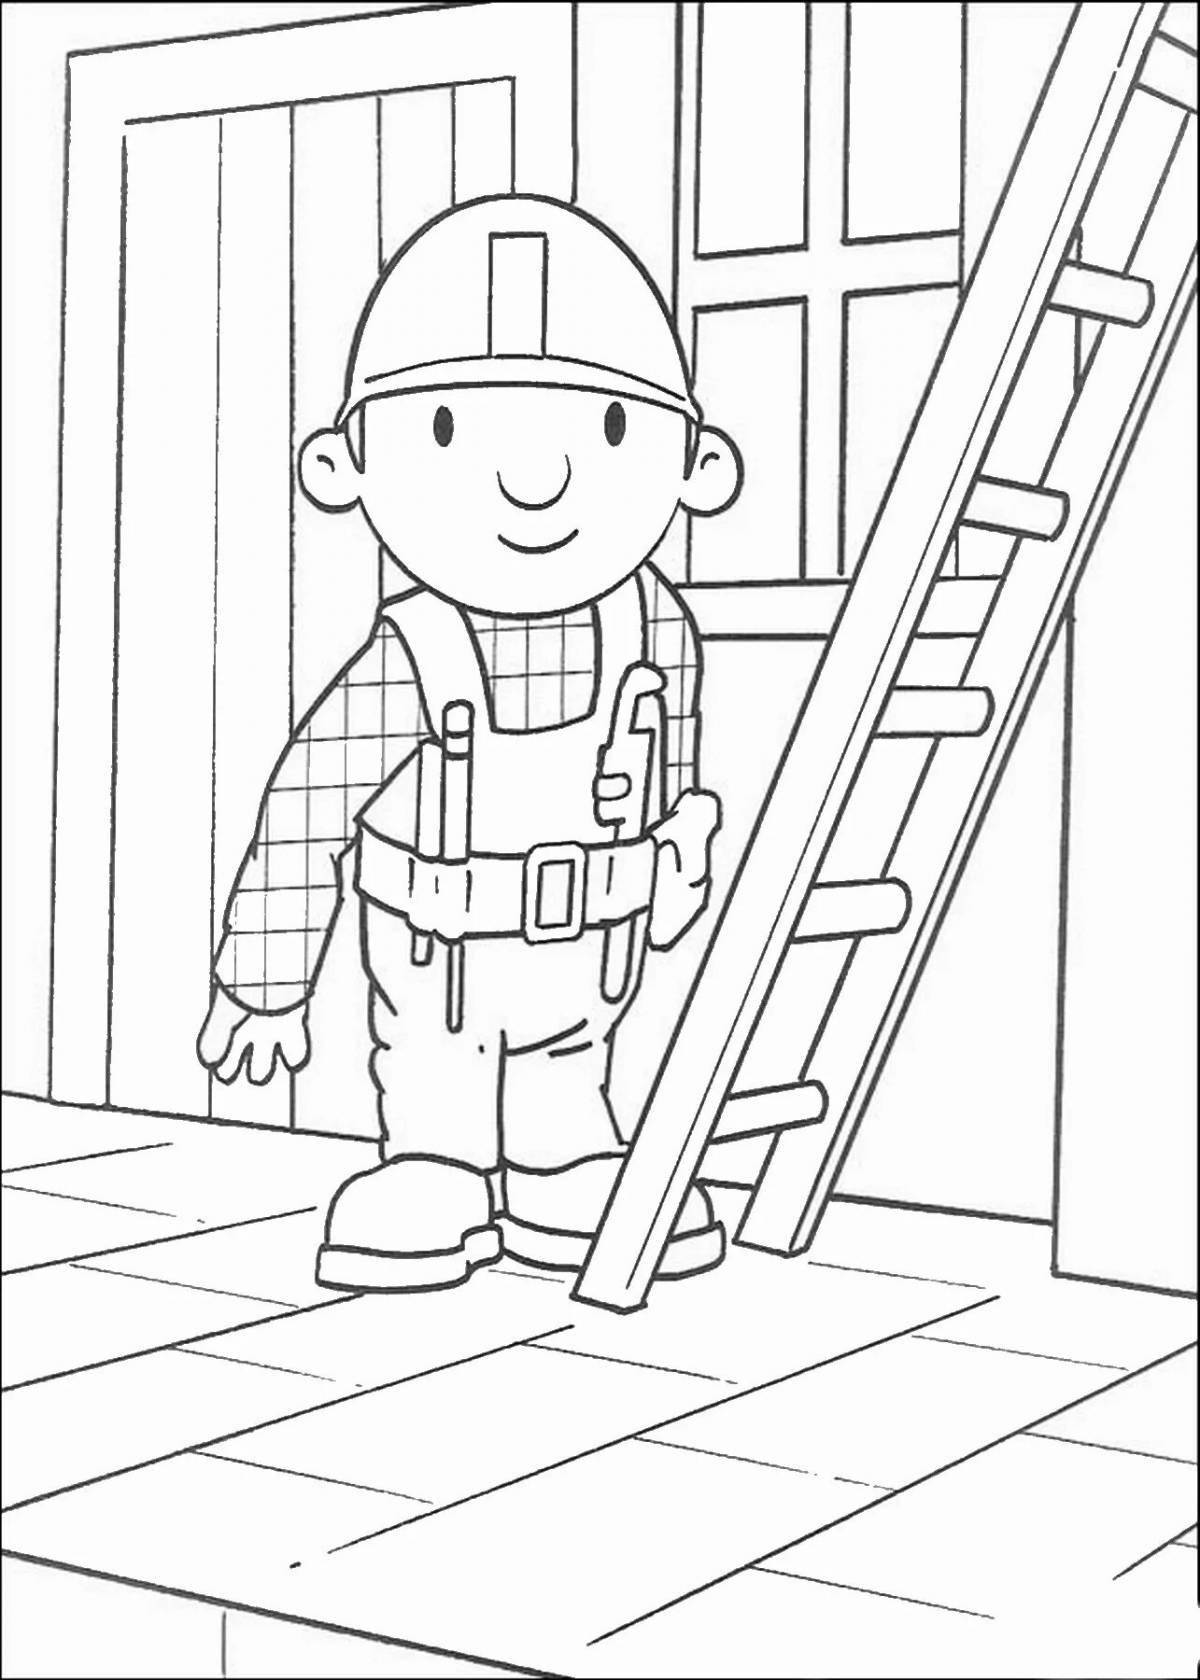 Bright labor protection through the eyes of children for preschoolers